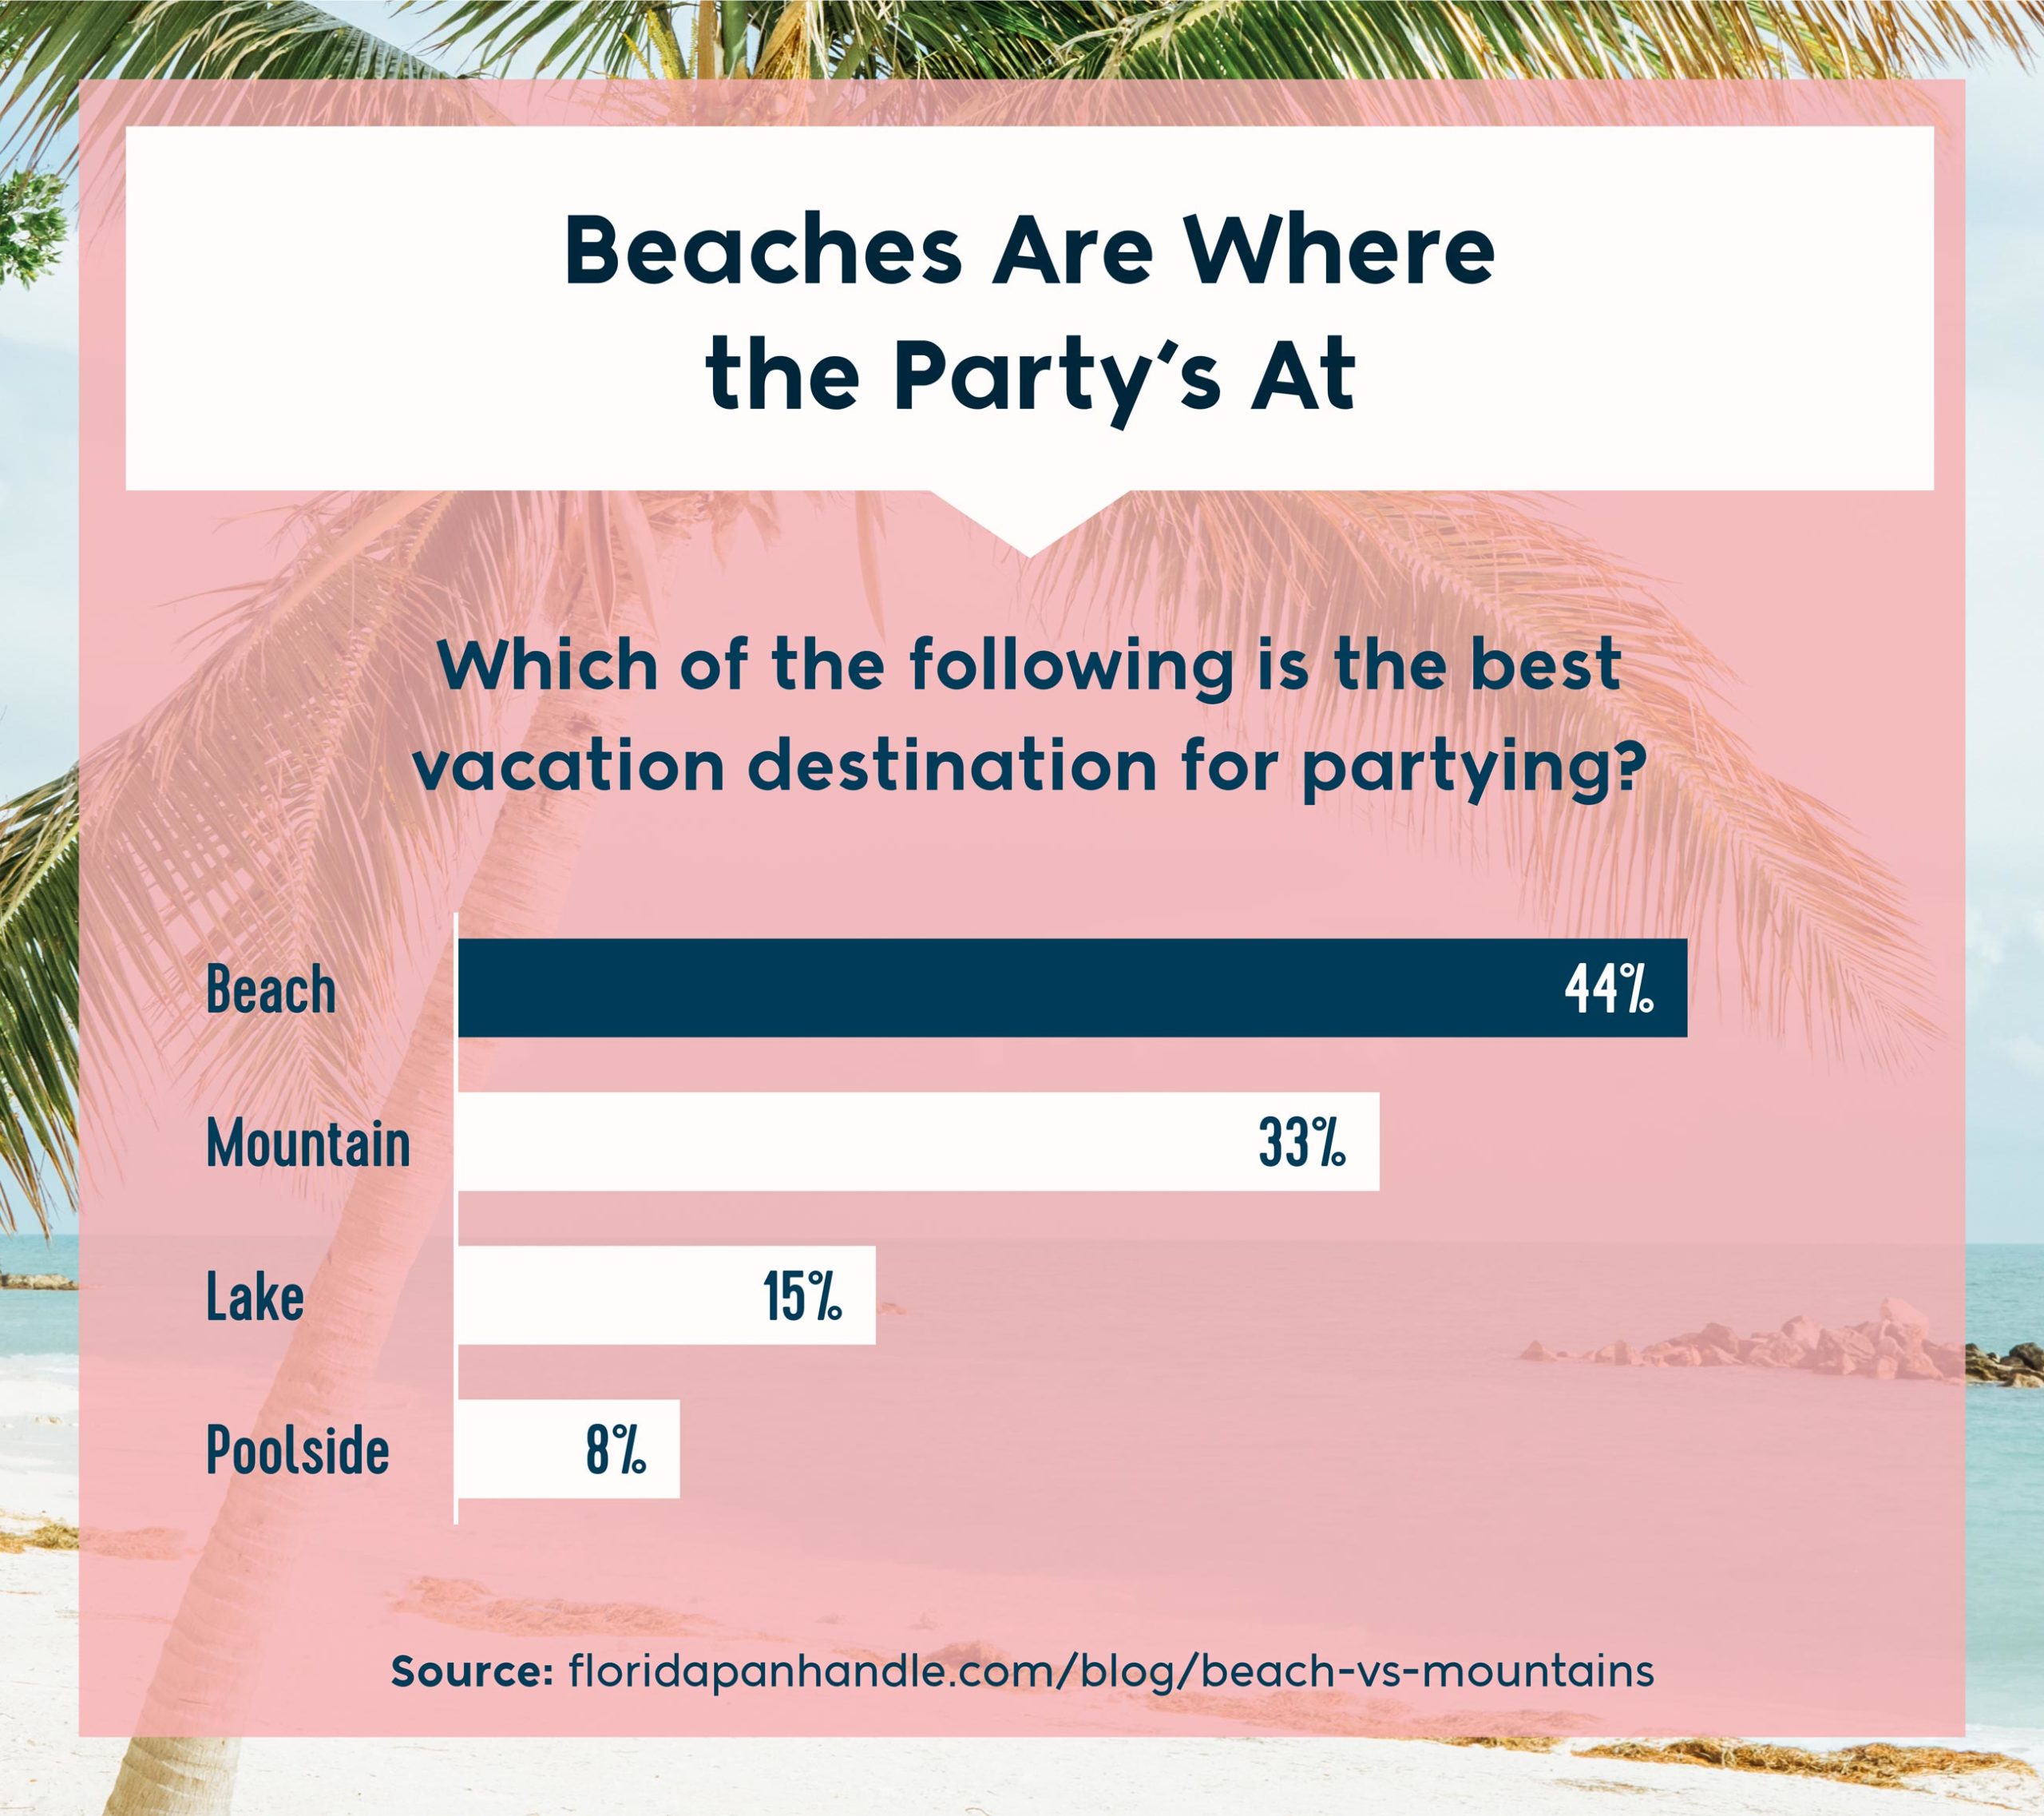 which of the following is the best vacation destination for partying? - Beach, mountain, lake or poolside